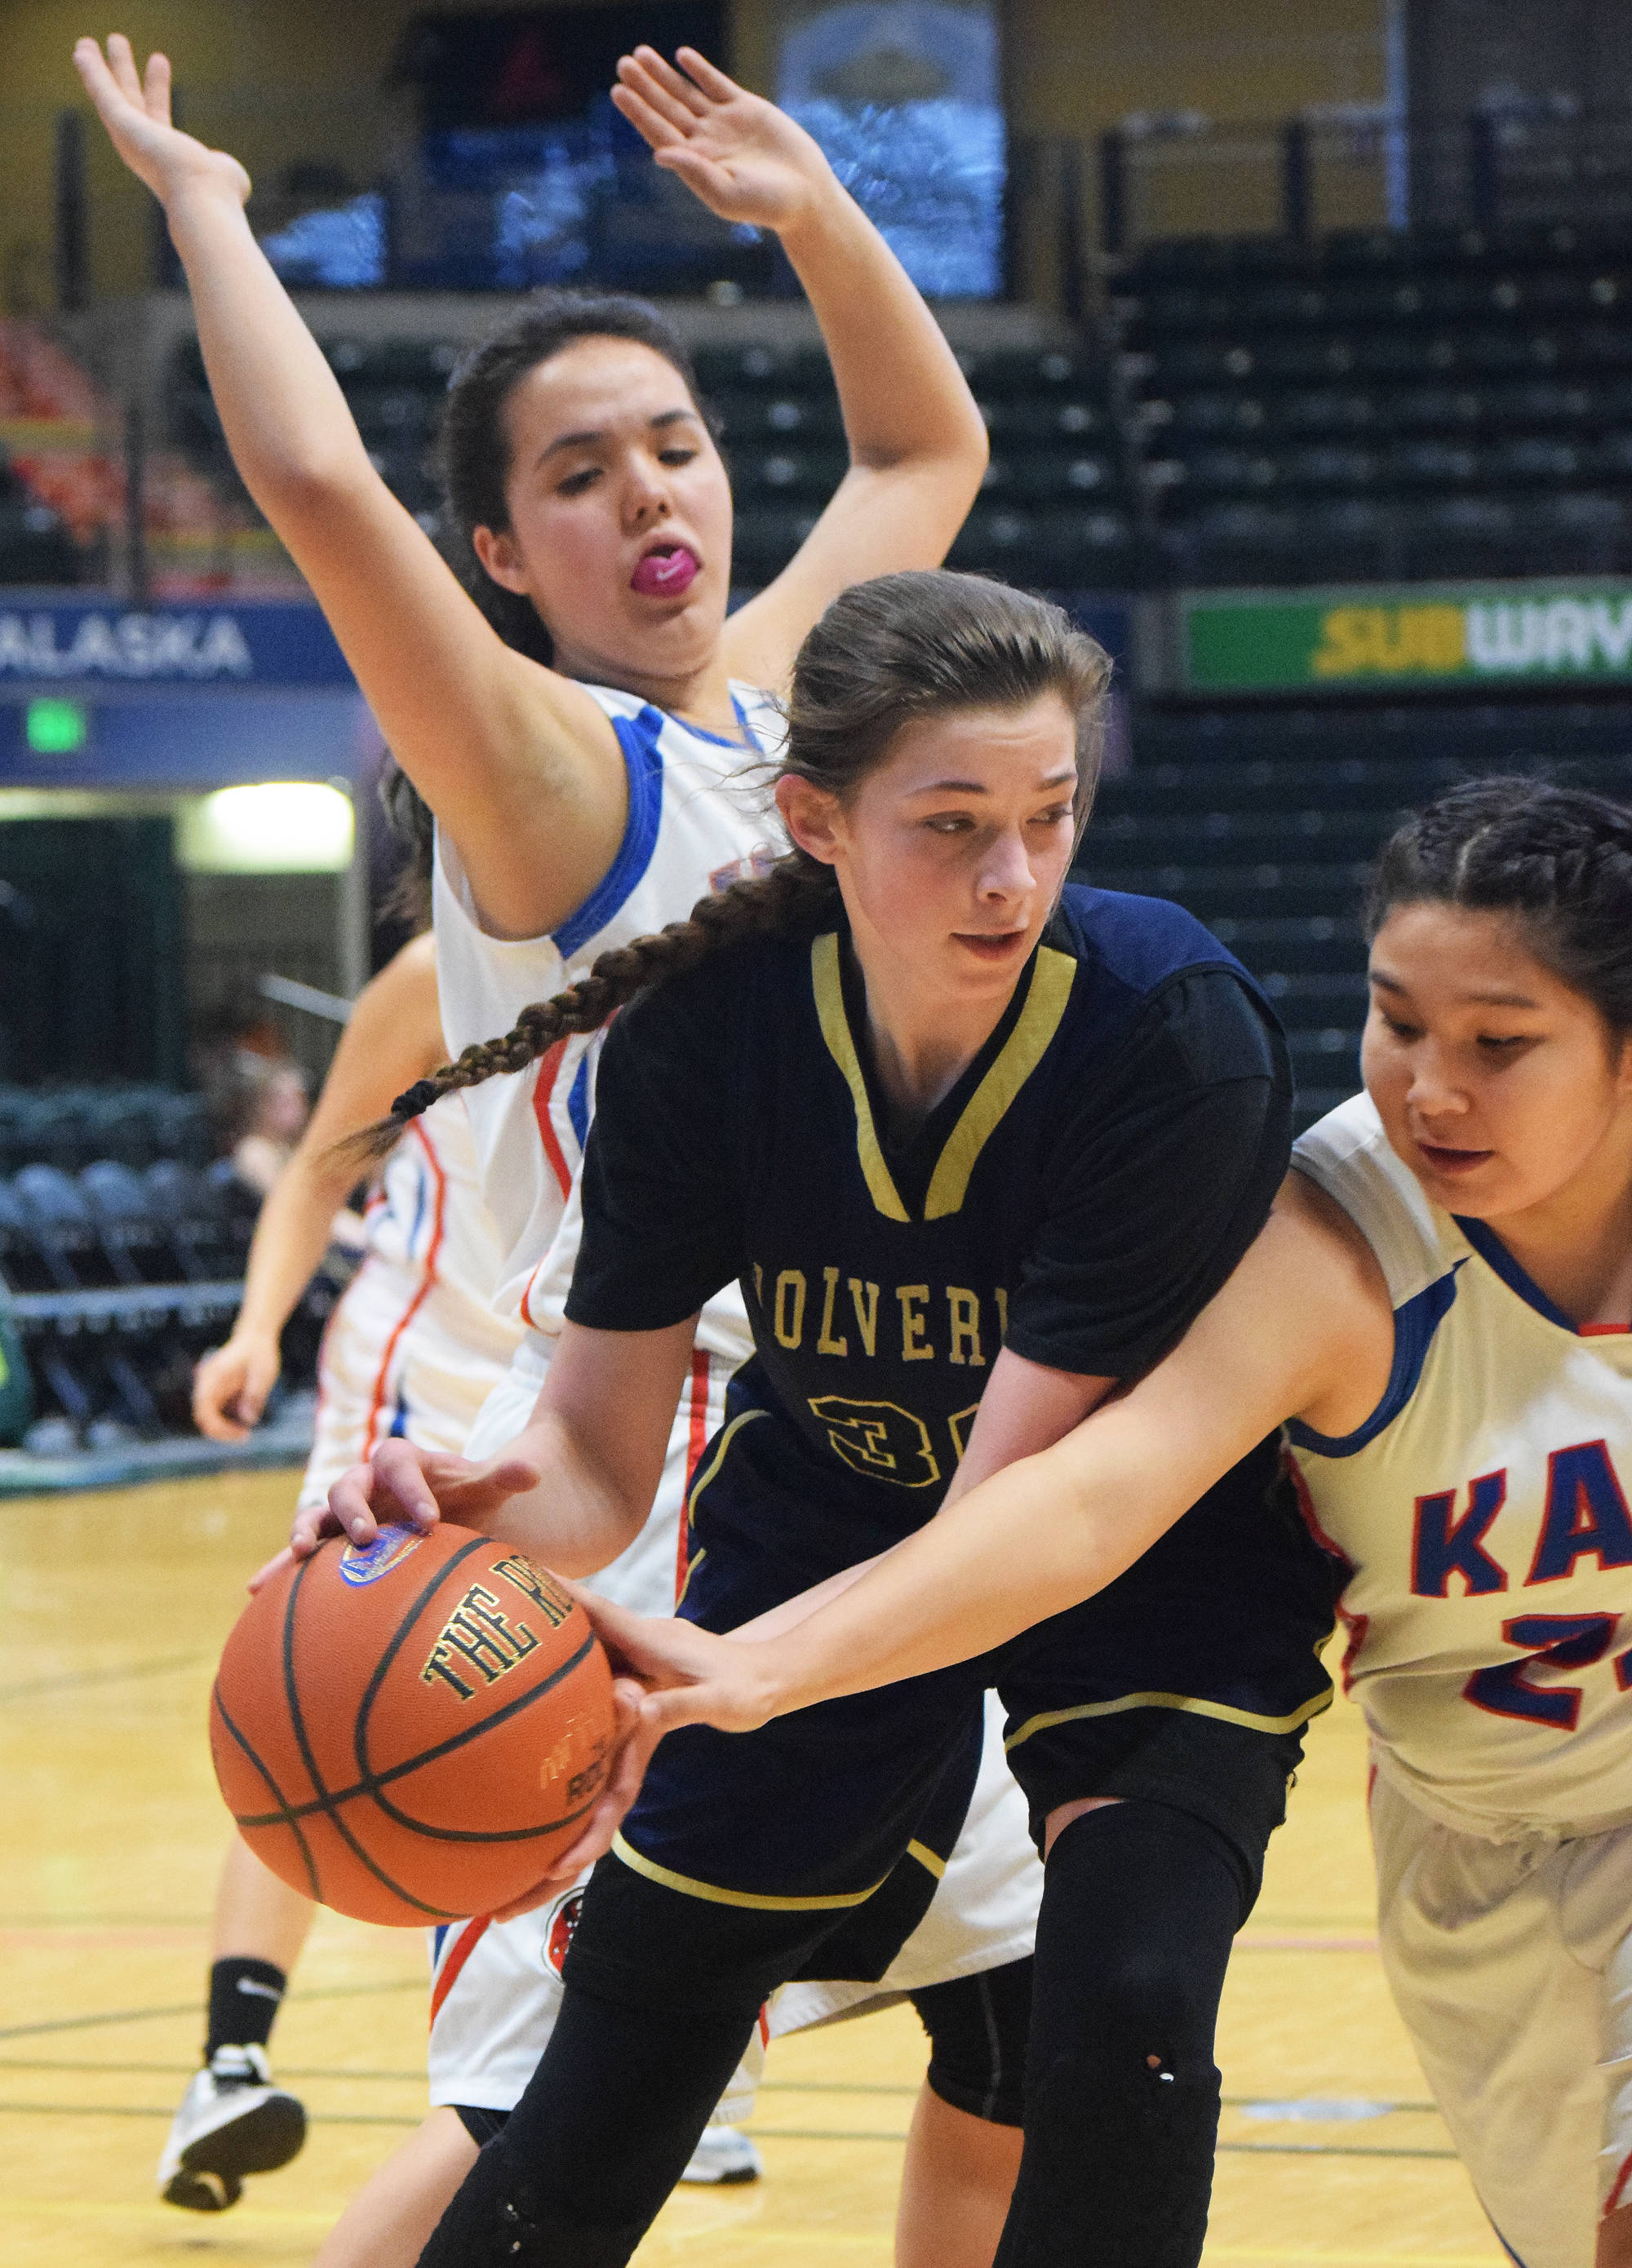 Ninilchik’s DeeAnn White battles for a rebound against Kake’s Felicia Ross-Shaquanie Saturday in the Class 1A girls state tournament fourth-place game at the Alaska Airlines Center in Anchorage. (Photo by Joey Klecka/Peninsula Clarion)